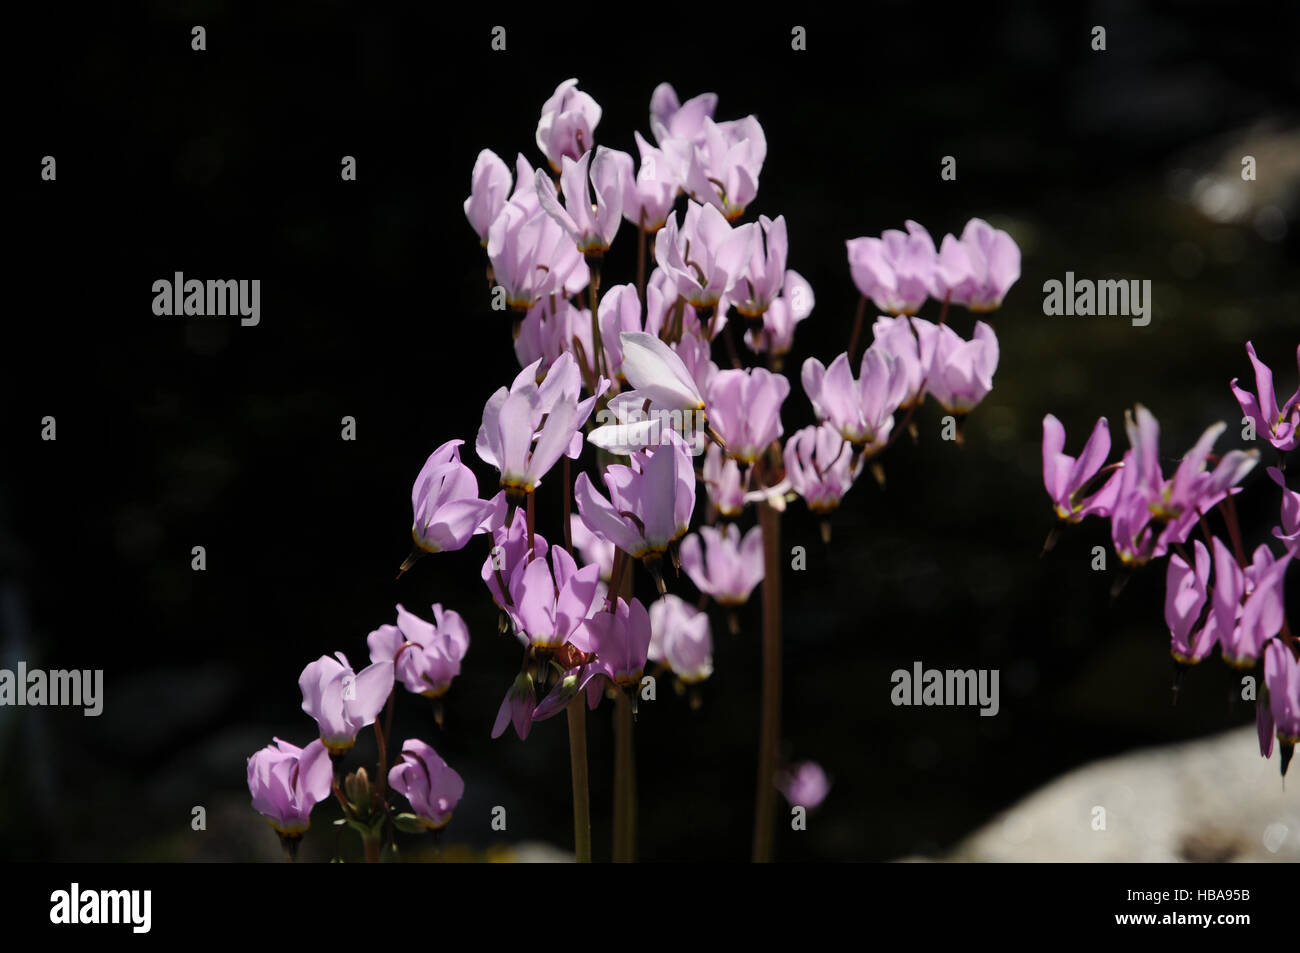 Dodecatheon meadia, Meads shootingstar Stock Photo